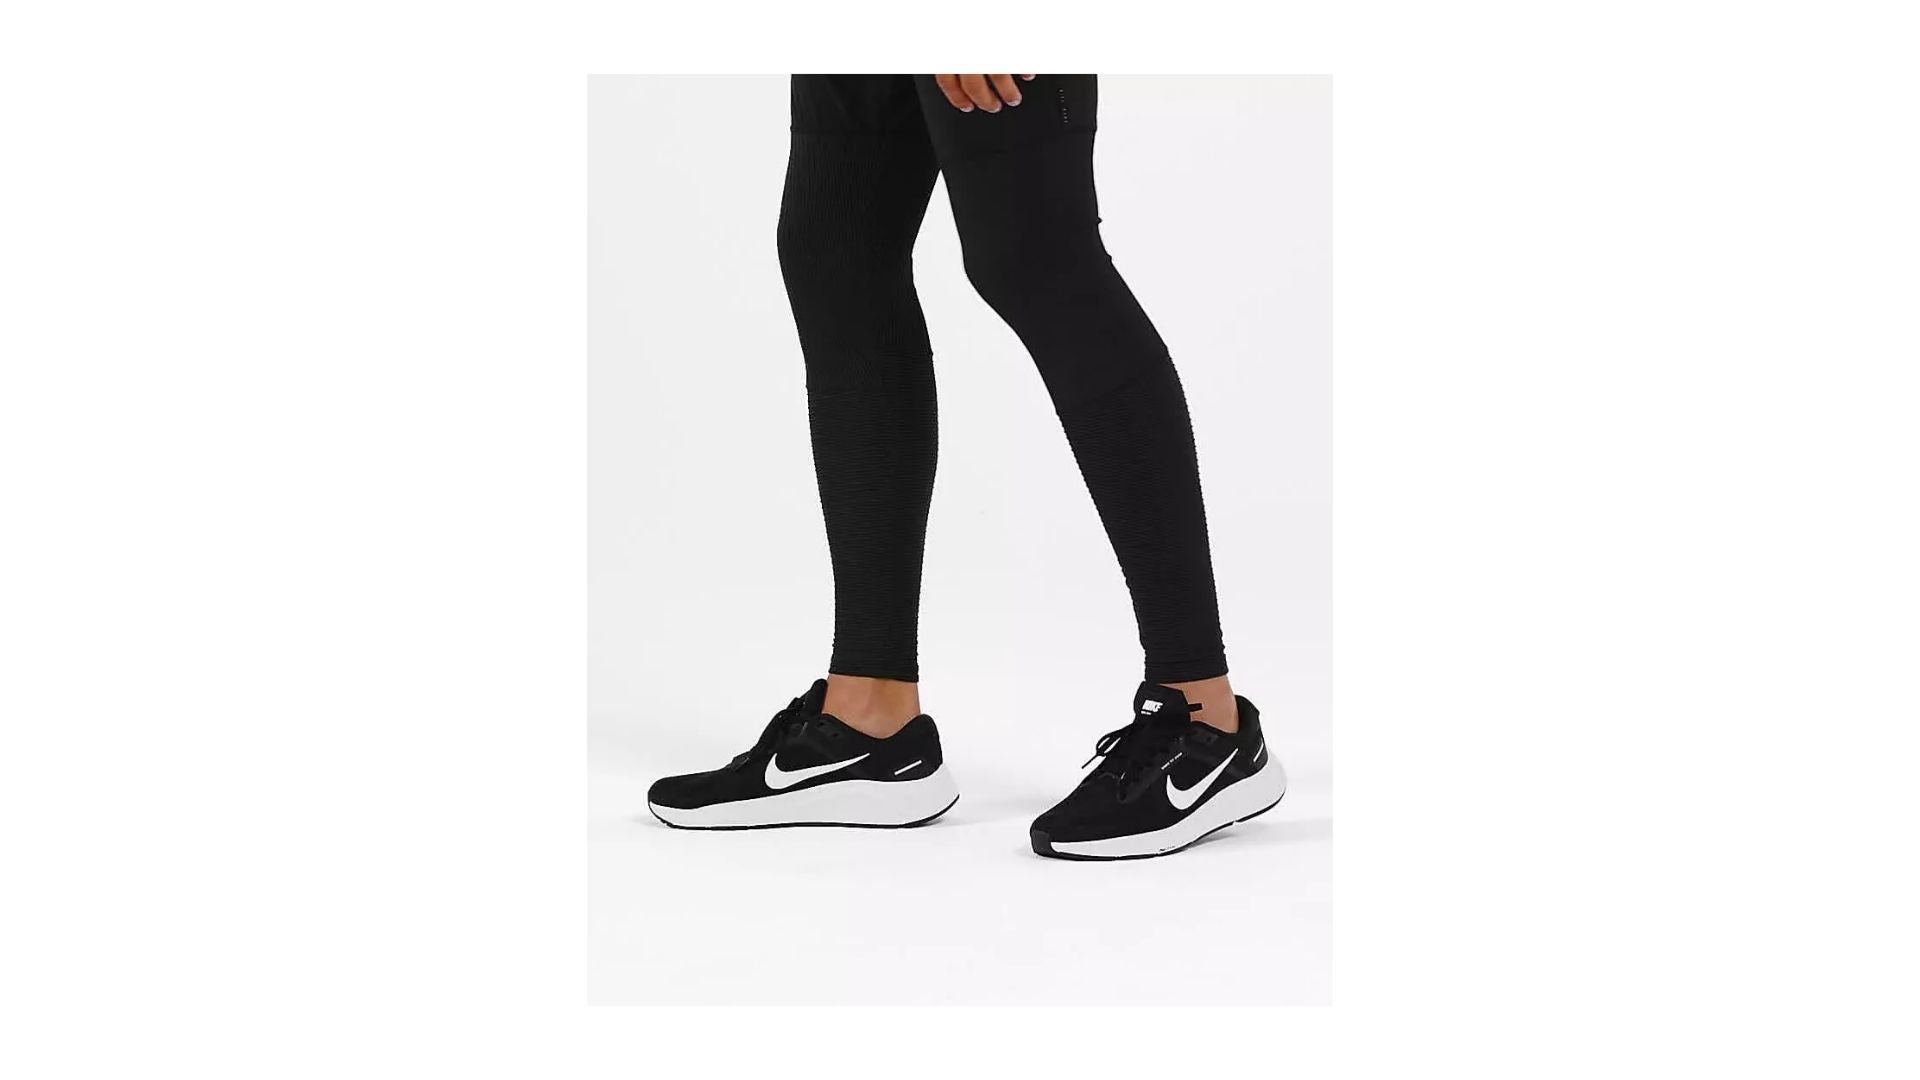 Best best nike crossfit shoes CrossFit Shoes for Women (Review & Buying Guide) in 2022